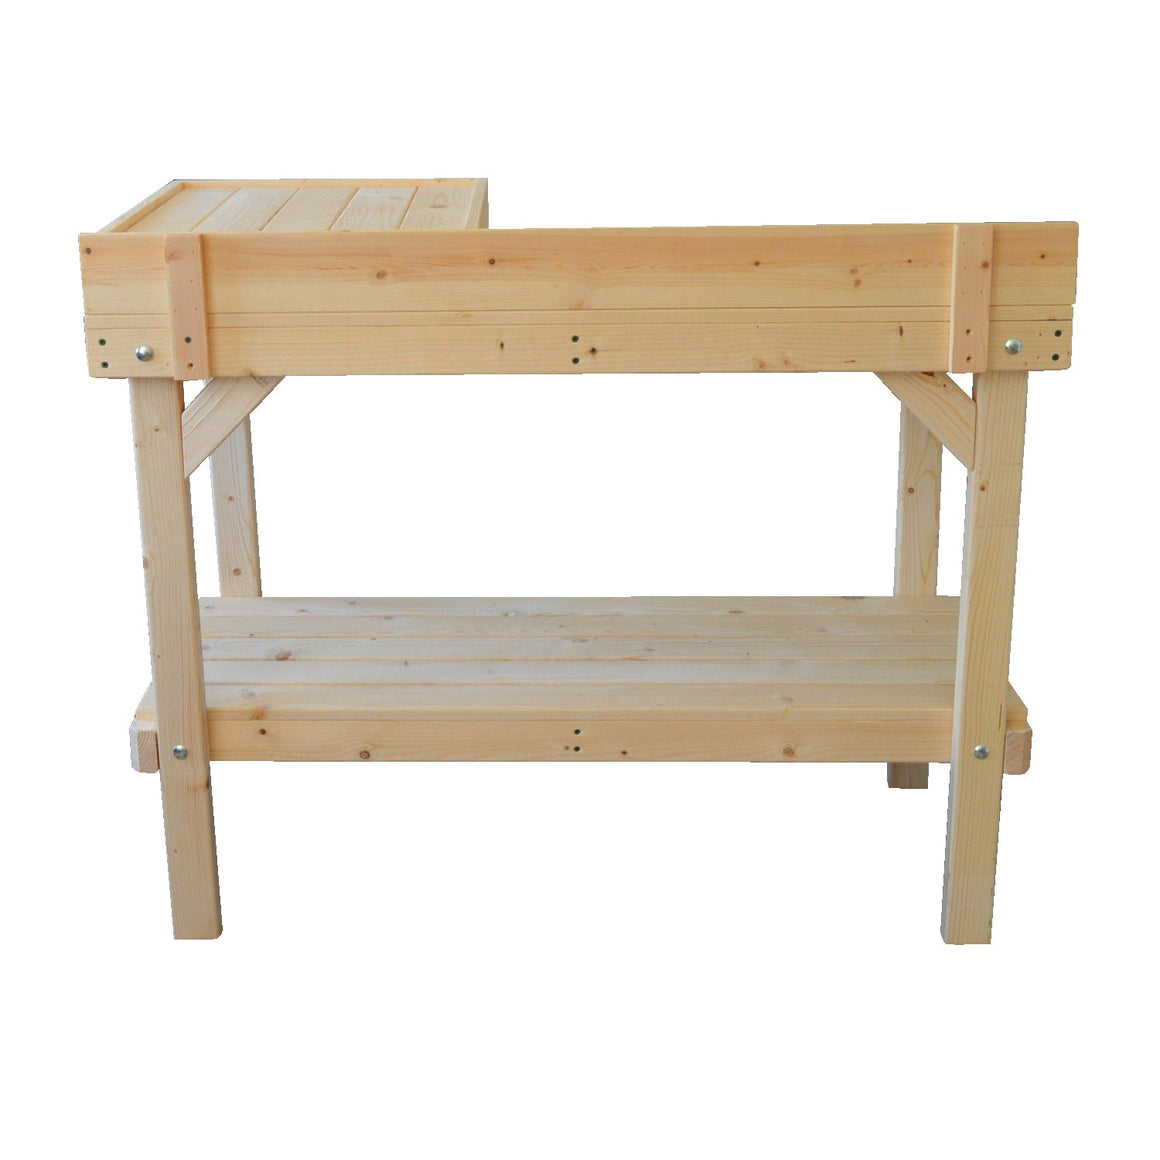 sturdy pine outdoor table